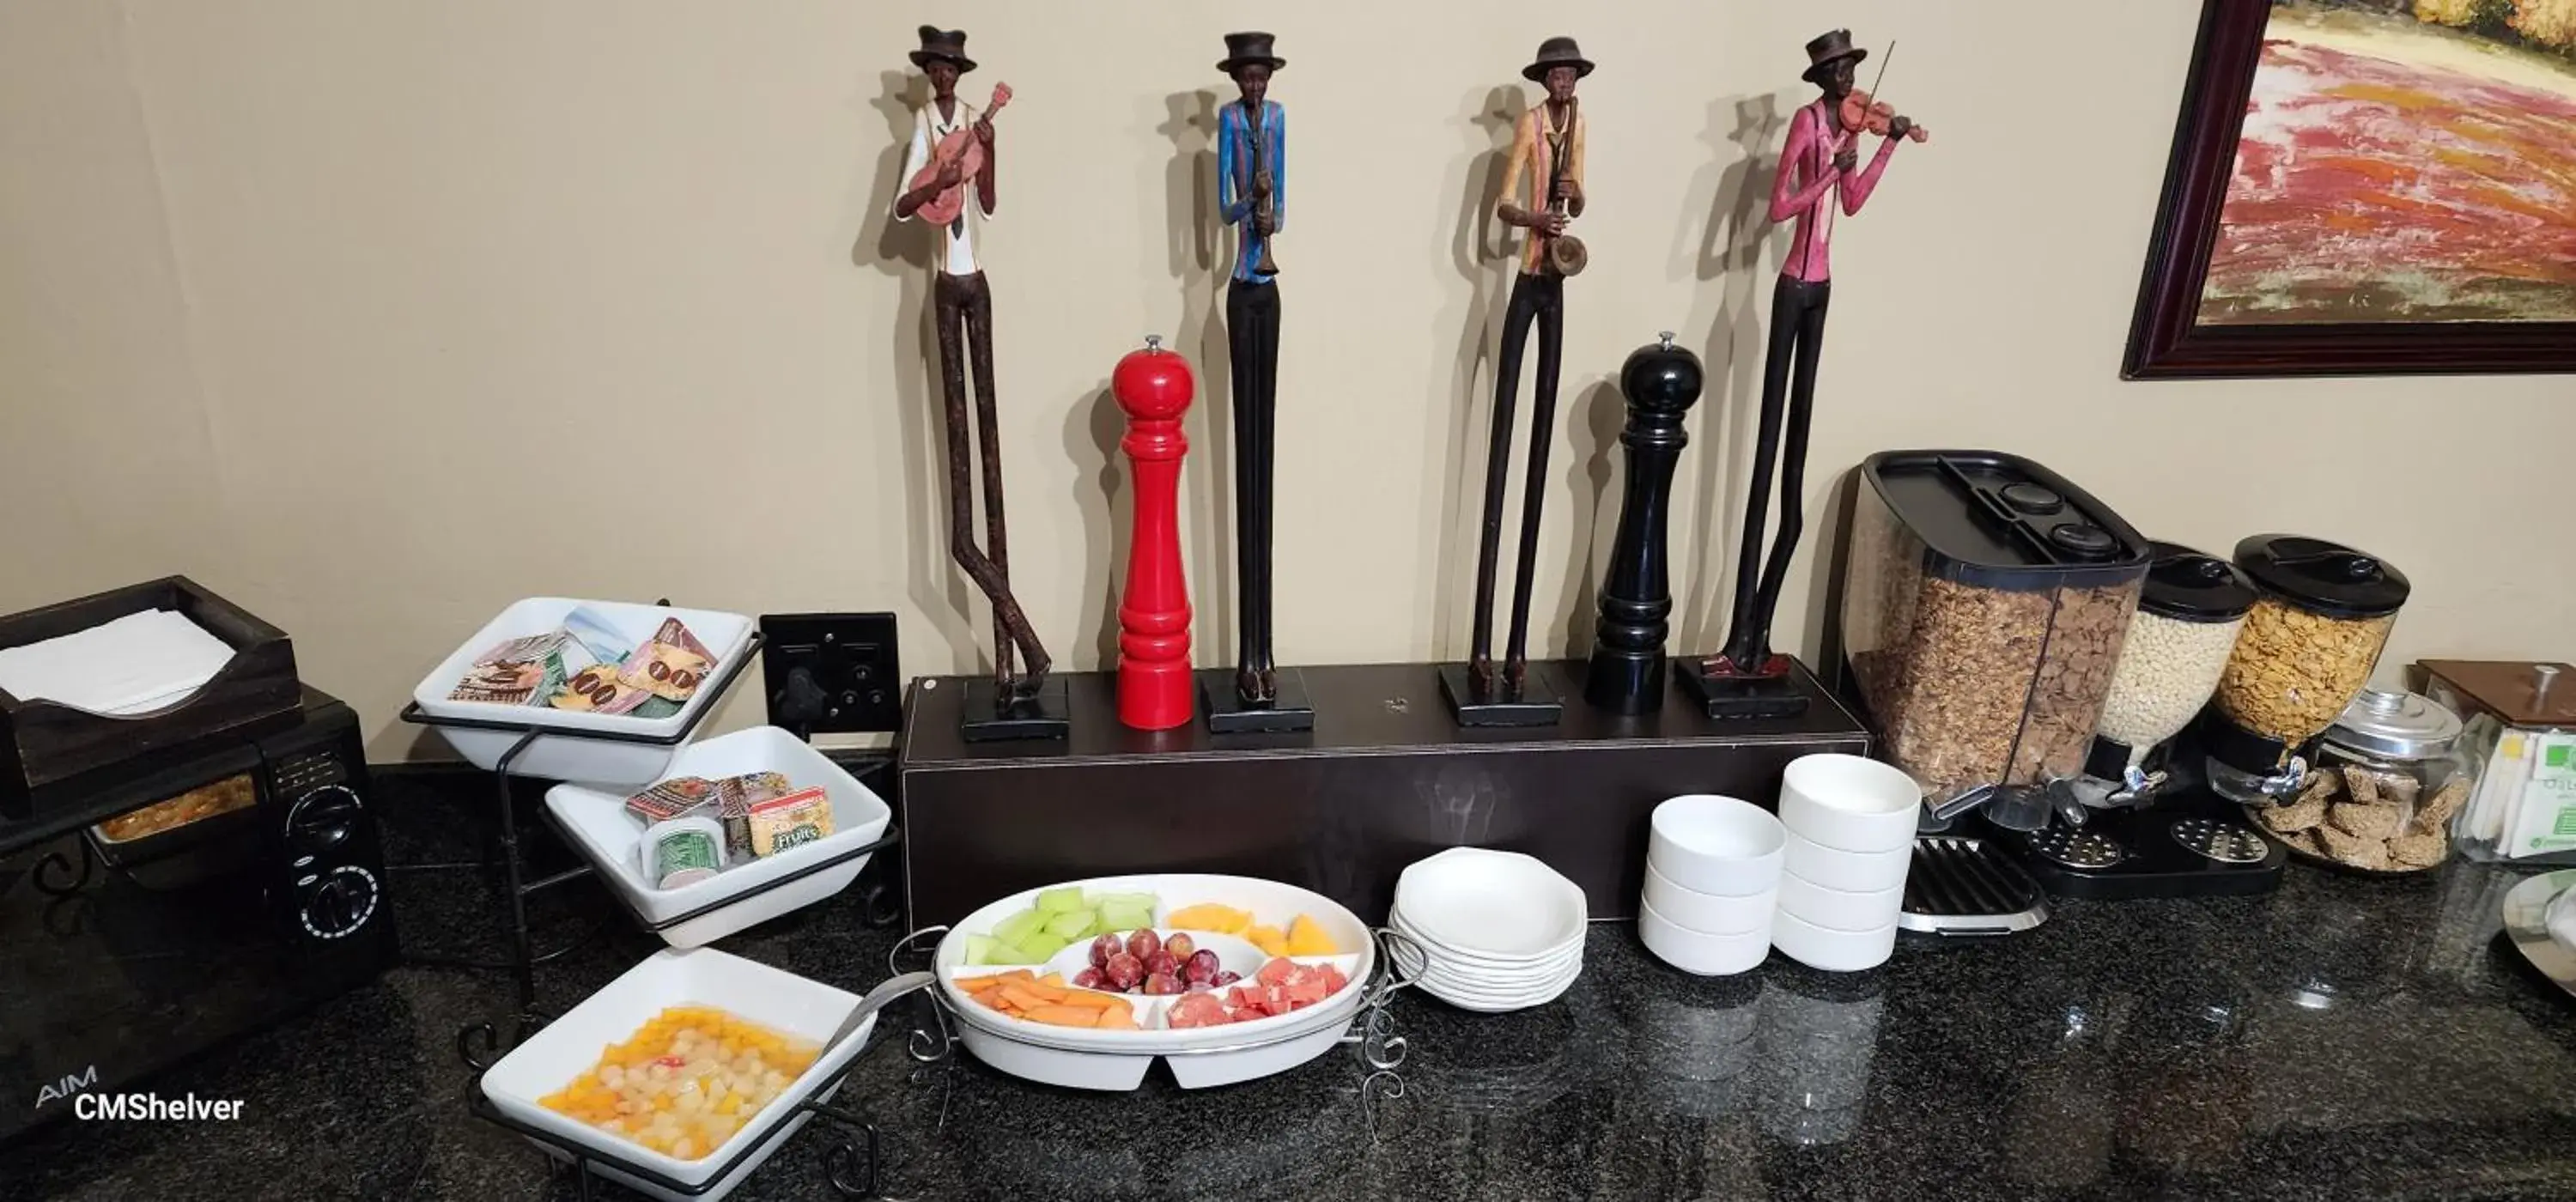 Buffet breakfast in See More Guest House